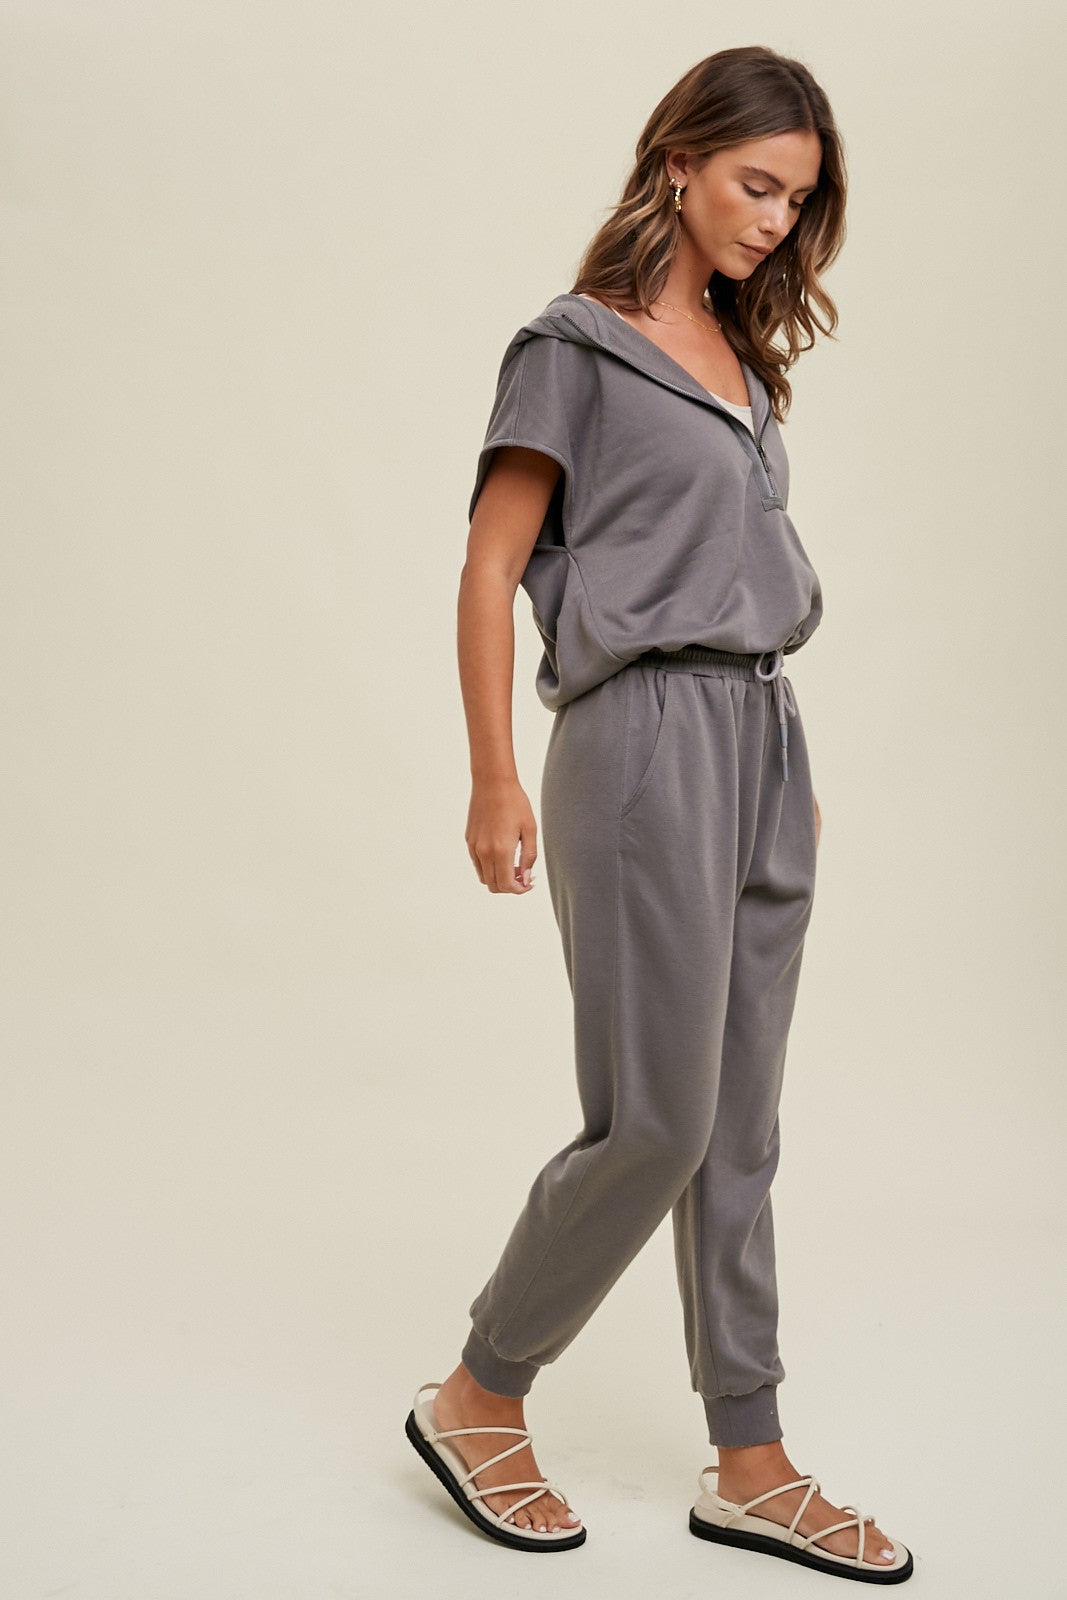 Shiloh French Terry Hooded Jumpsuit